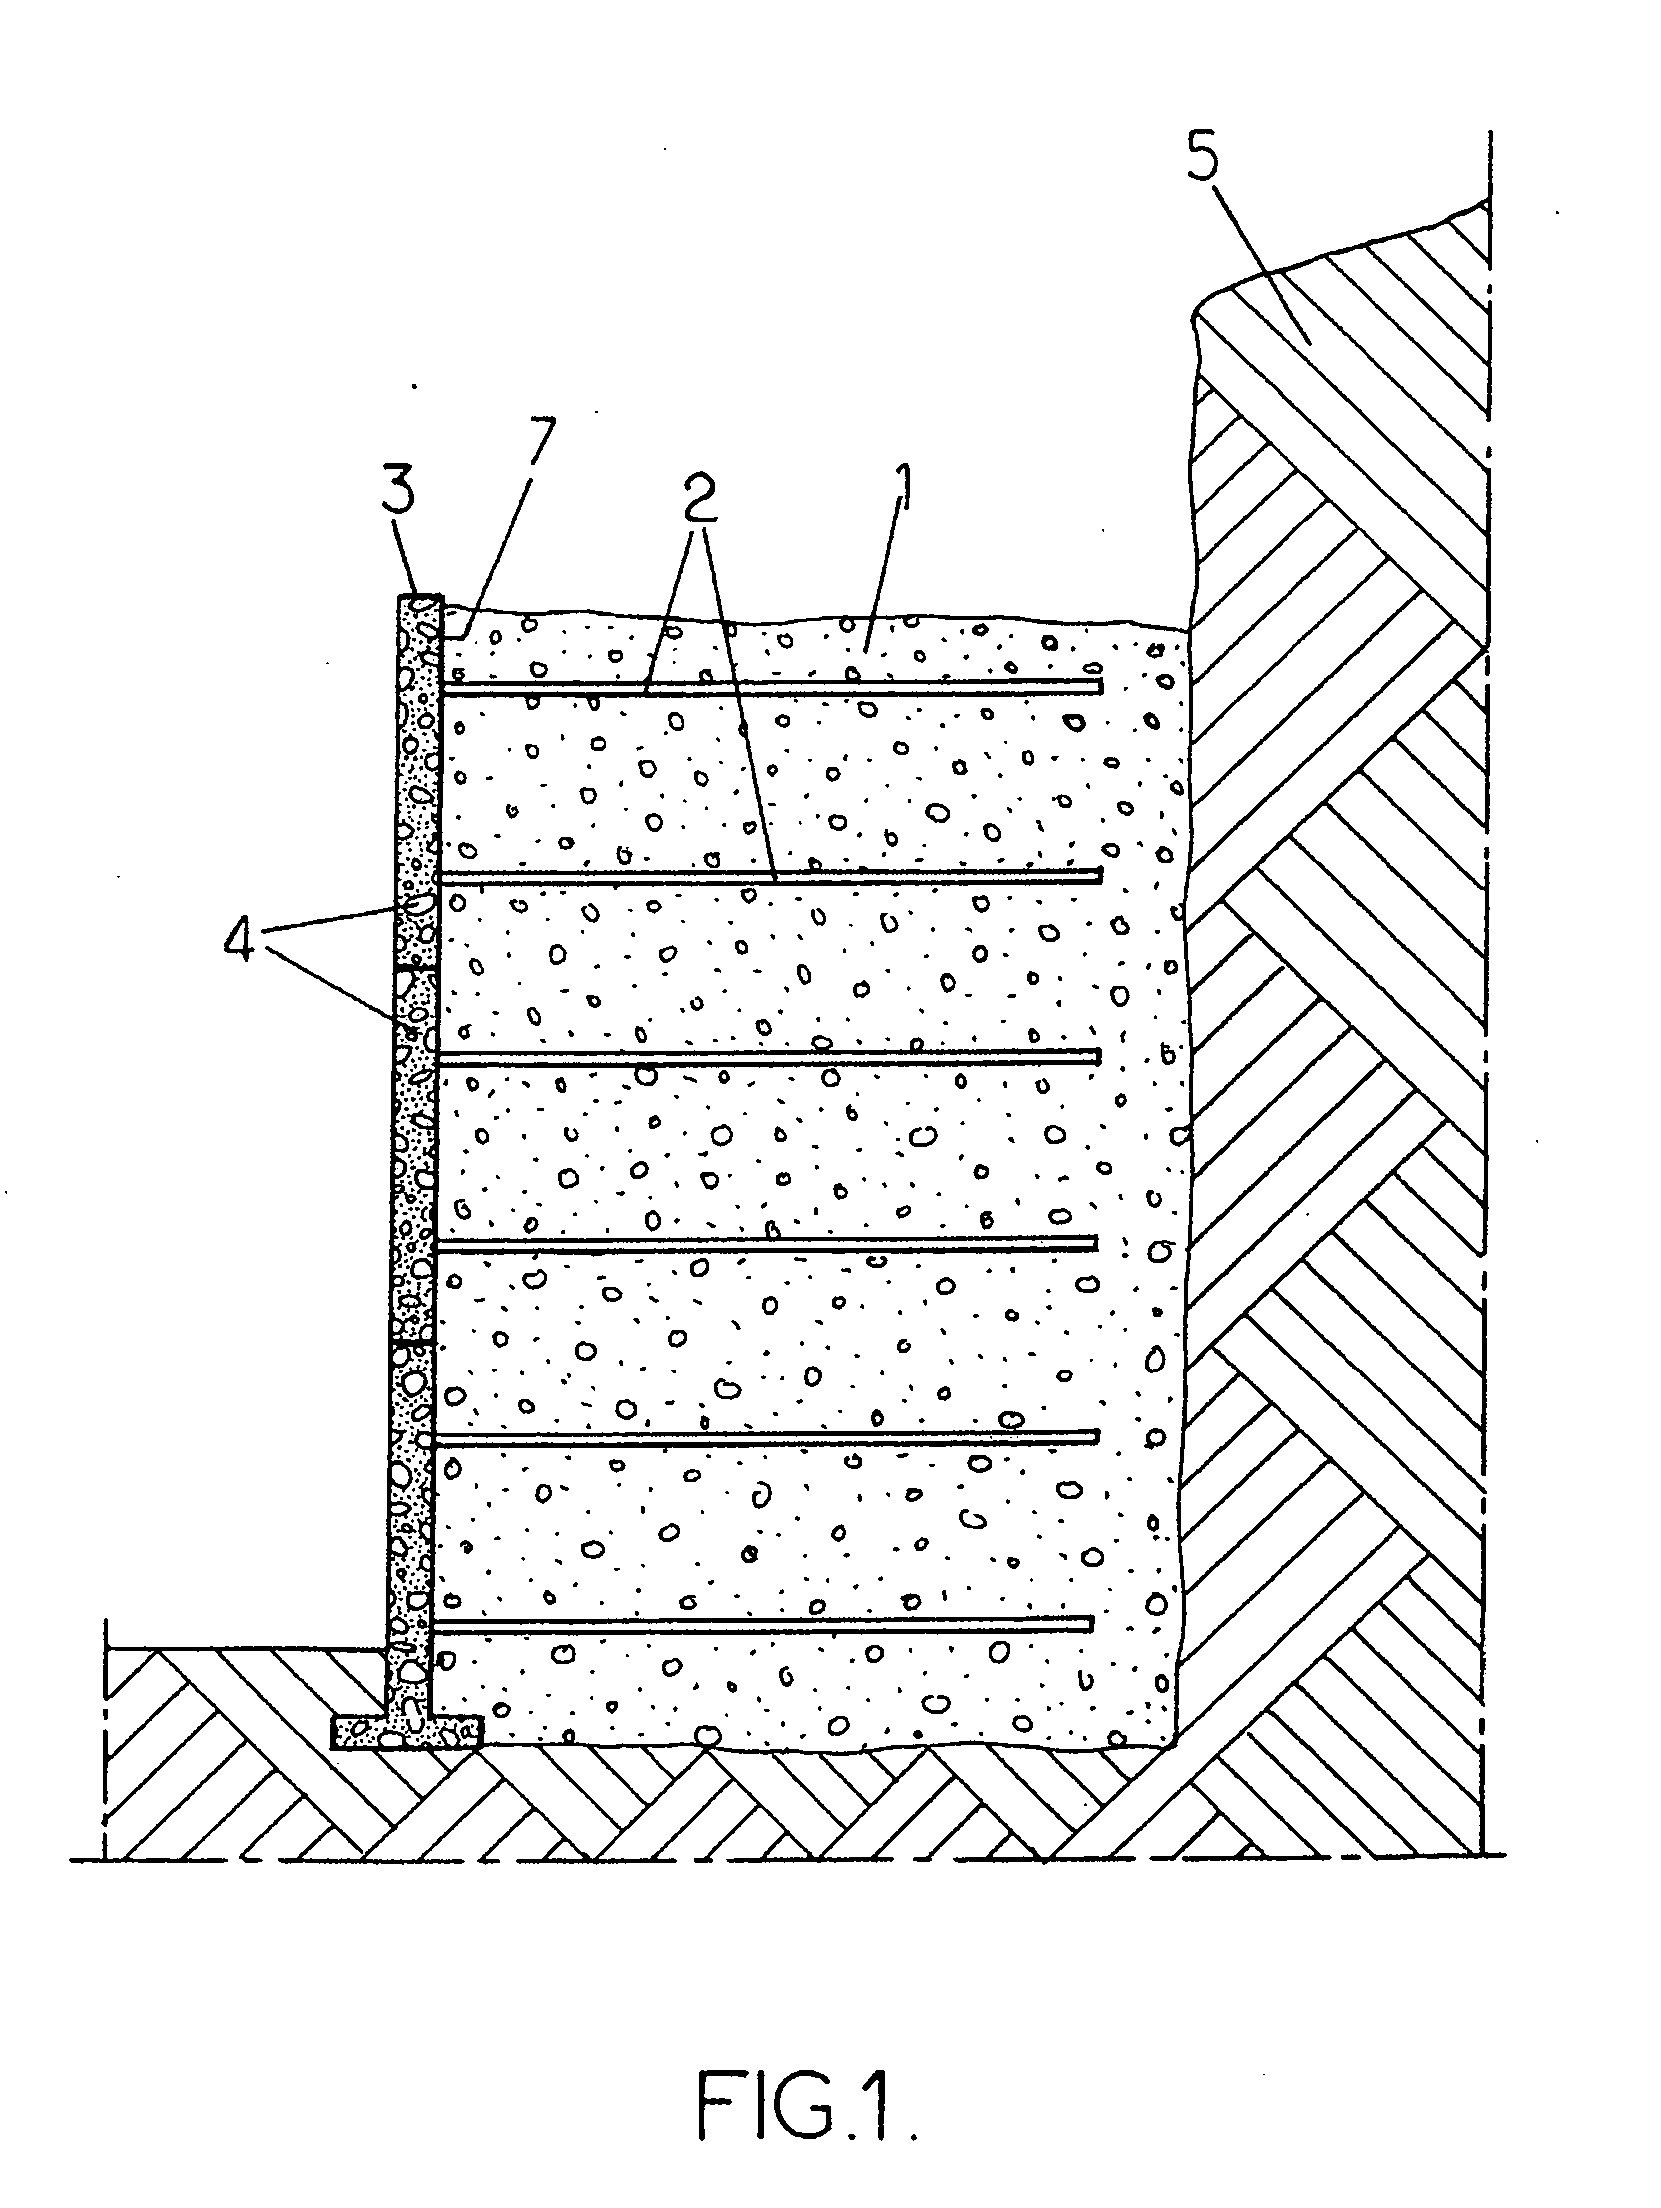 Stabilized soil structures and facing elements for its construction